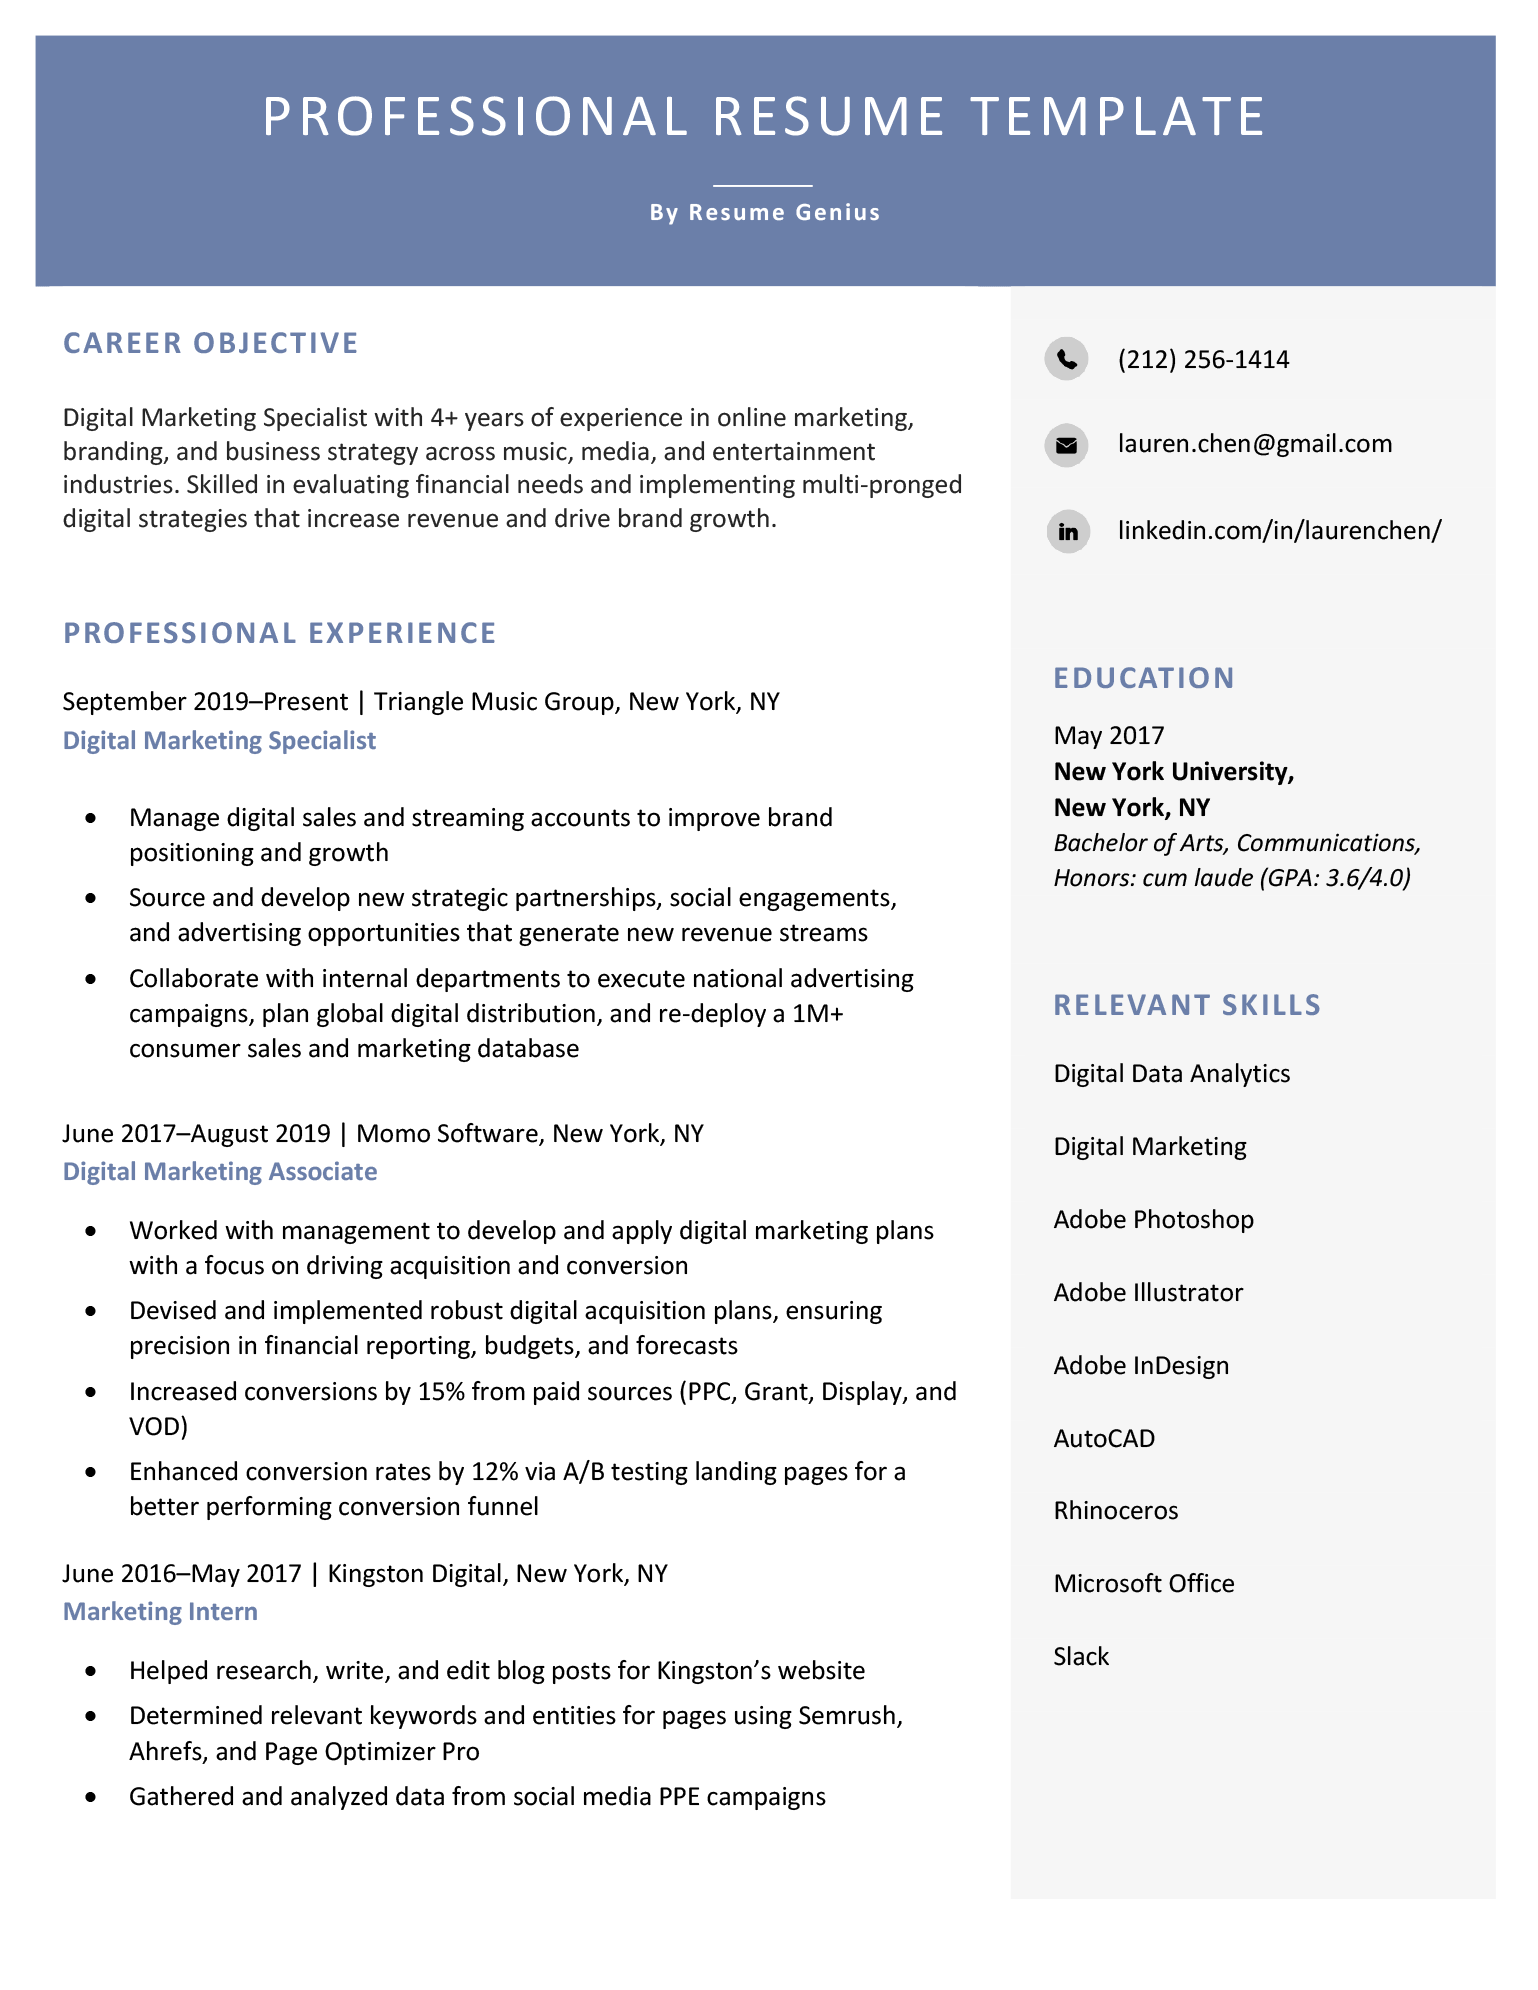 Professional resume template, featuring a modern yet formal design.